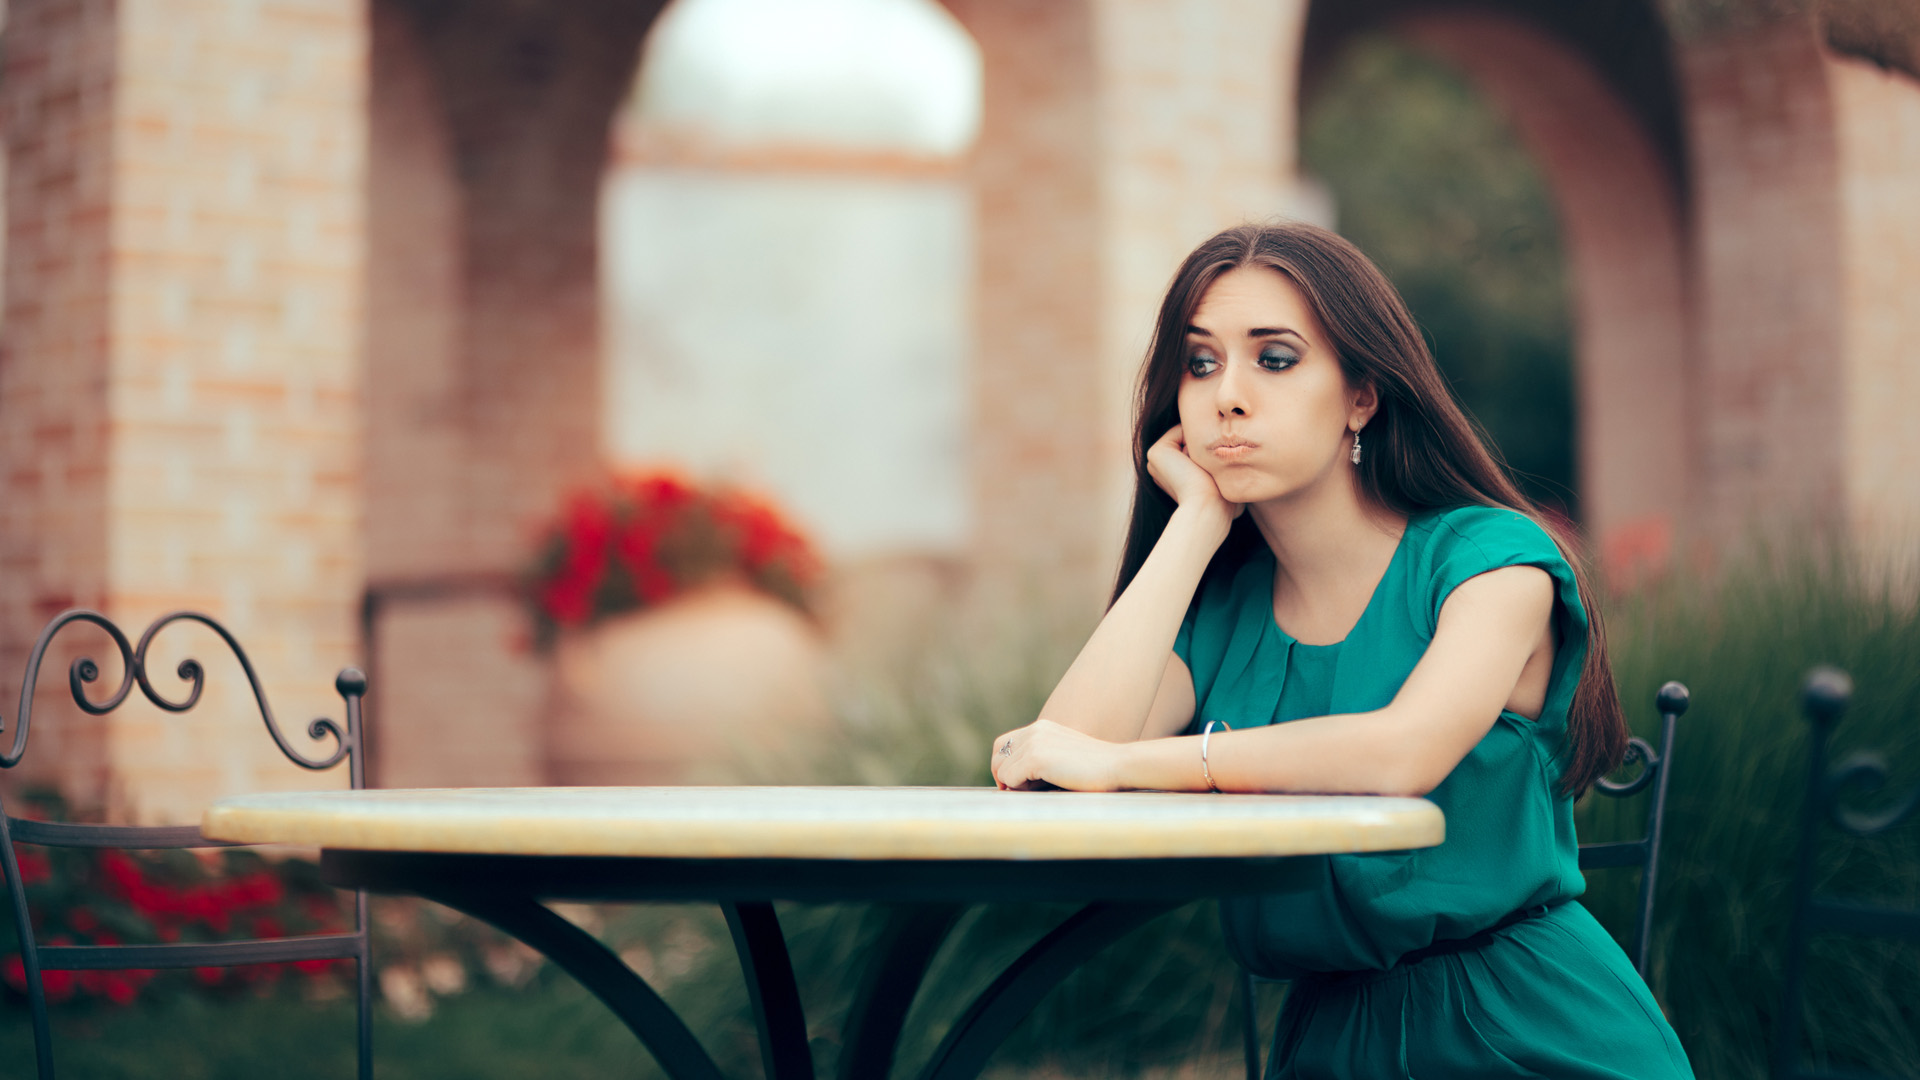 Brunette woman in turquoise dress sitting alone at a circular table resting her head in her palm and pouting her lips.